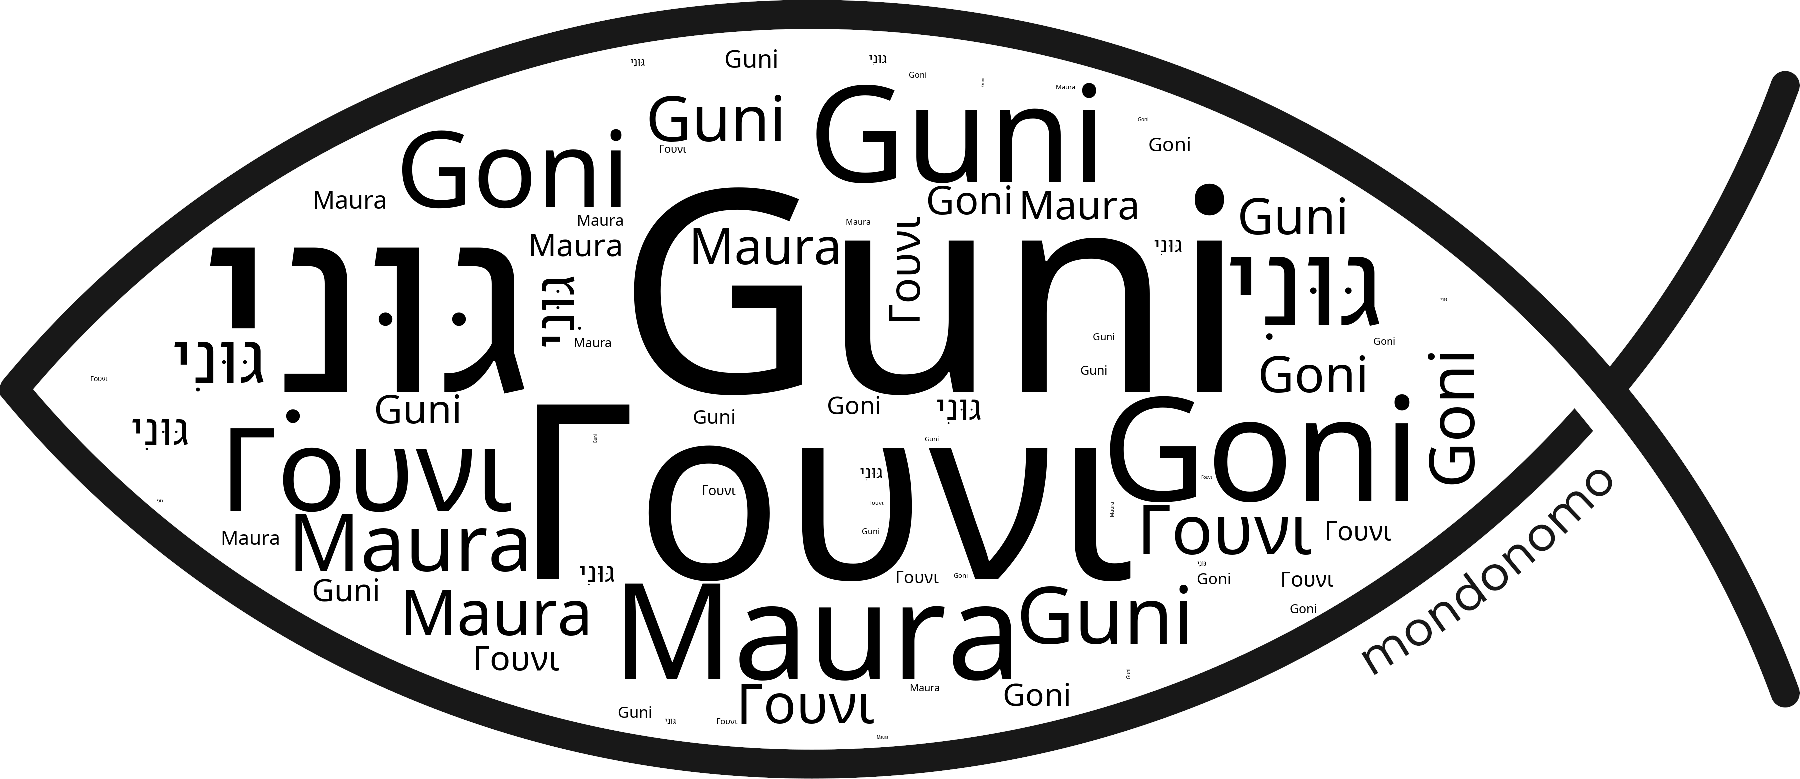 Name Guni in the world's Bibles